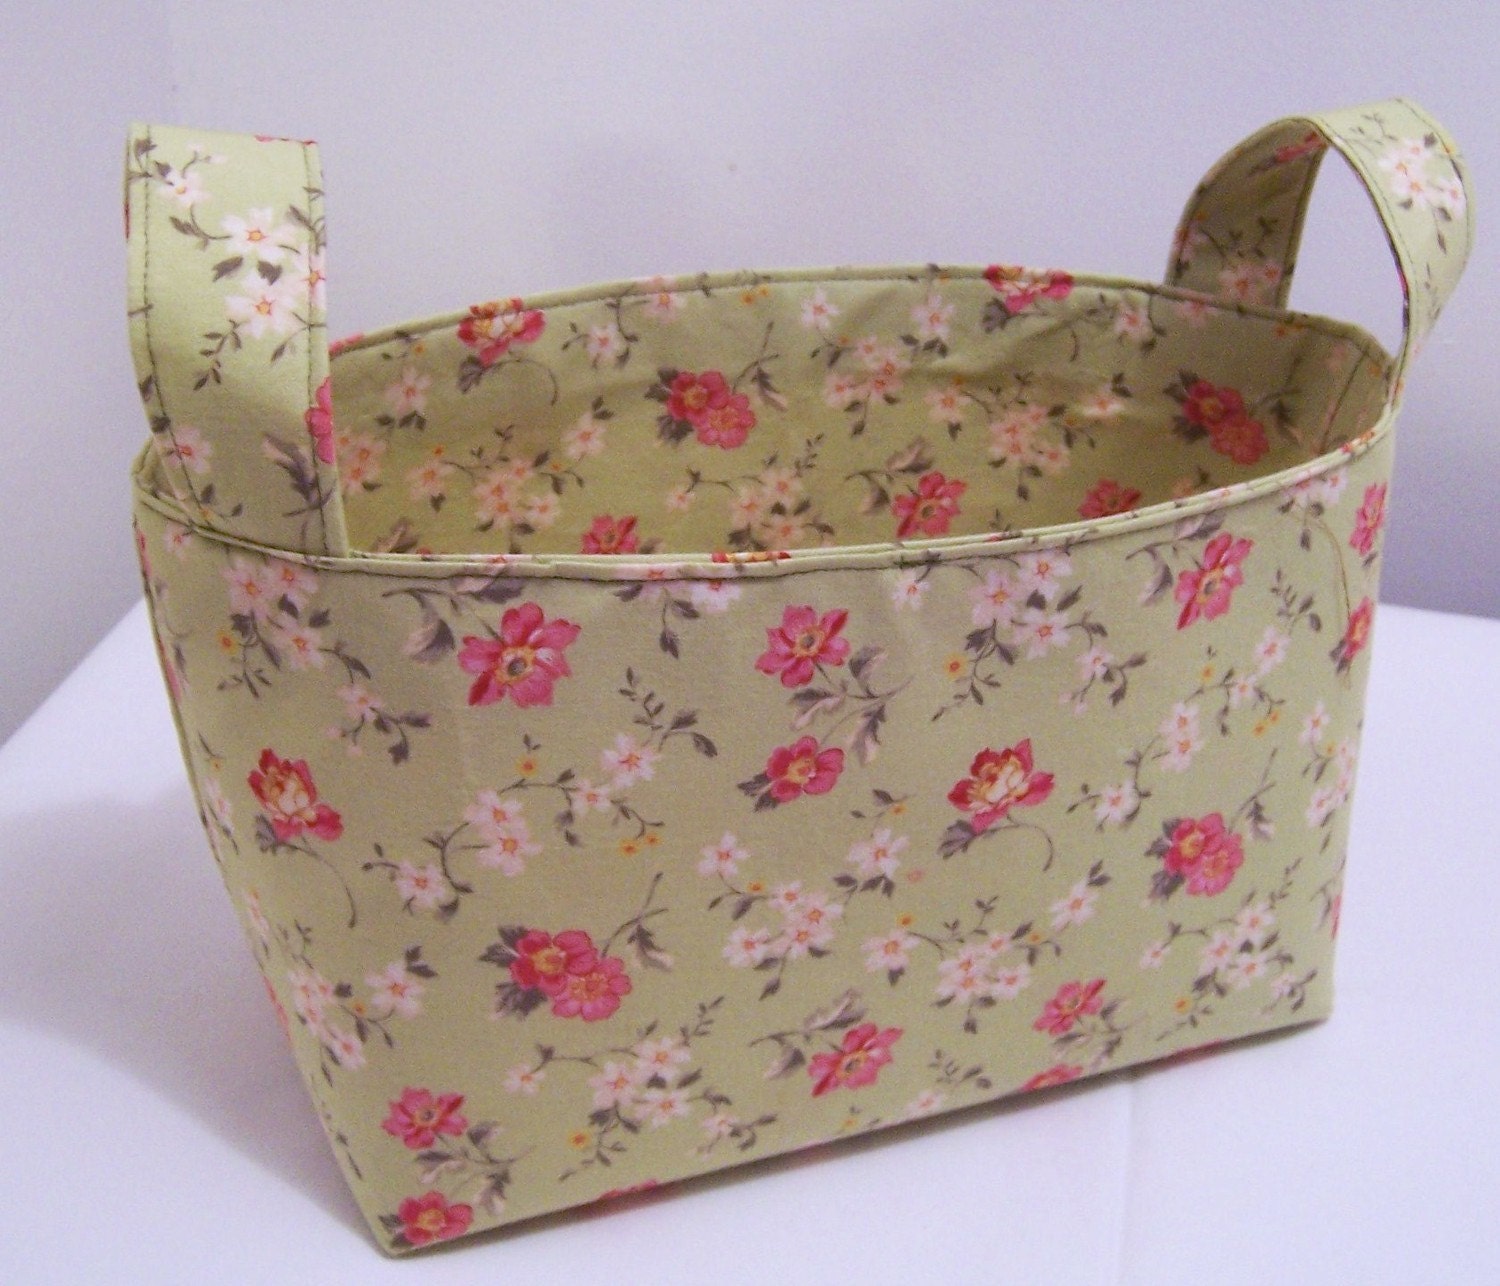 fabric bin basket sage green pink and white flowers